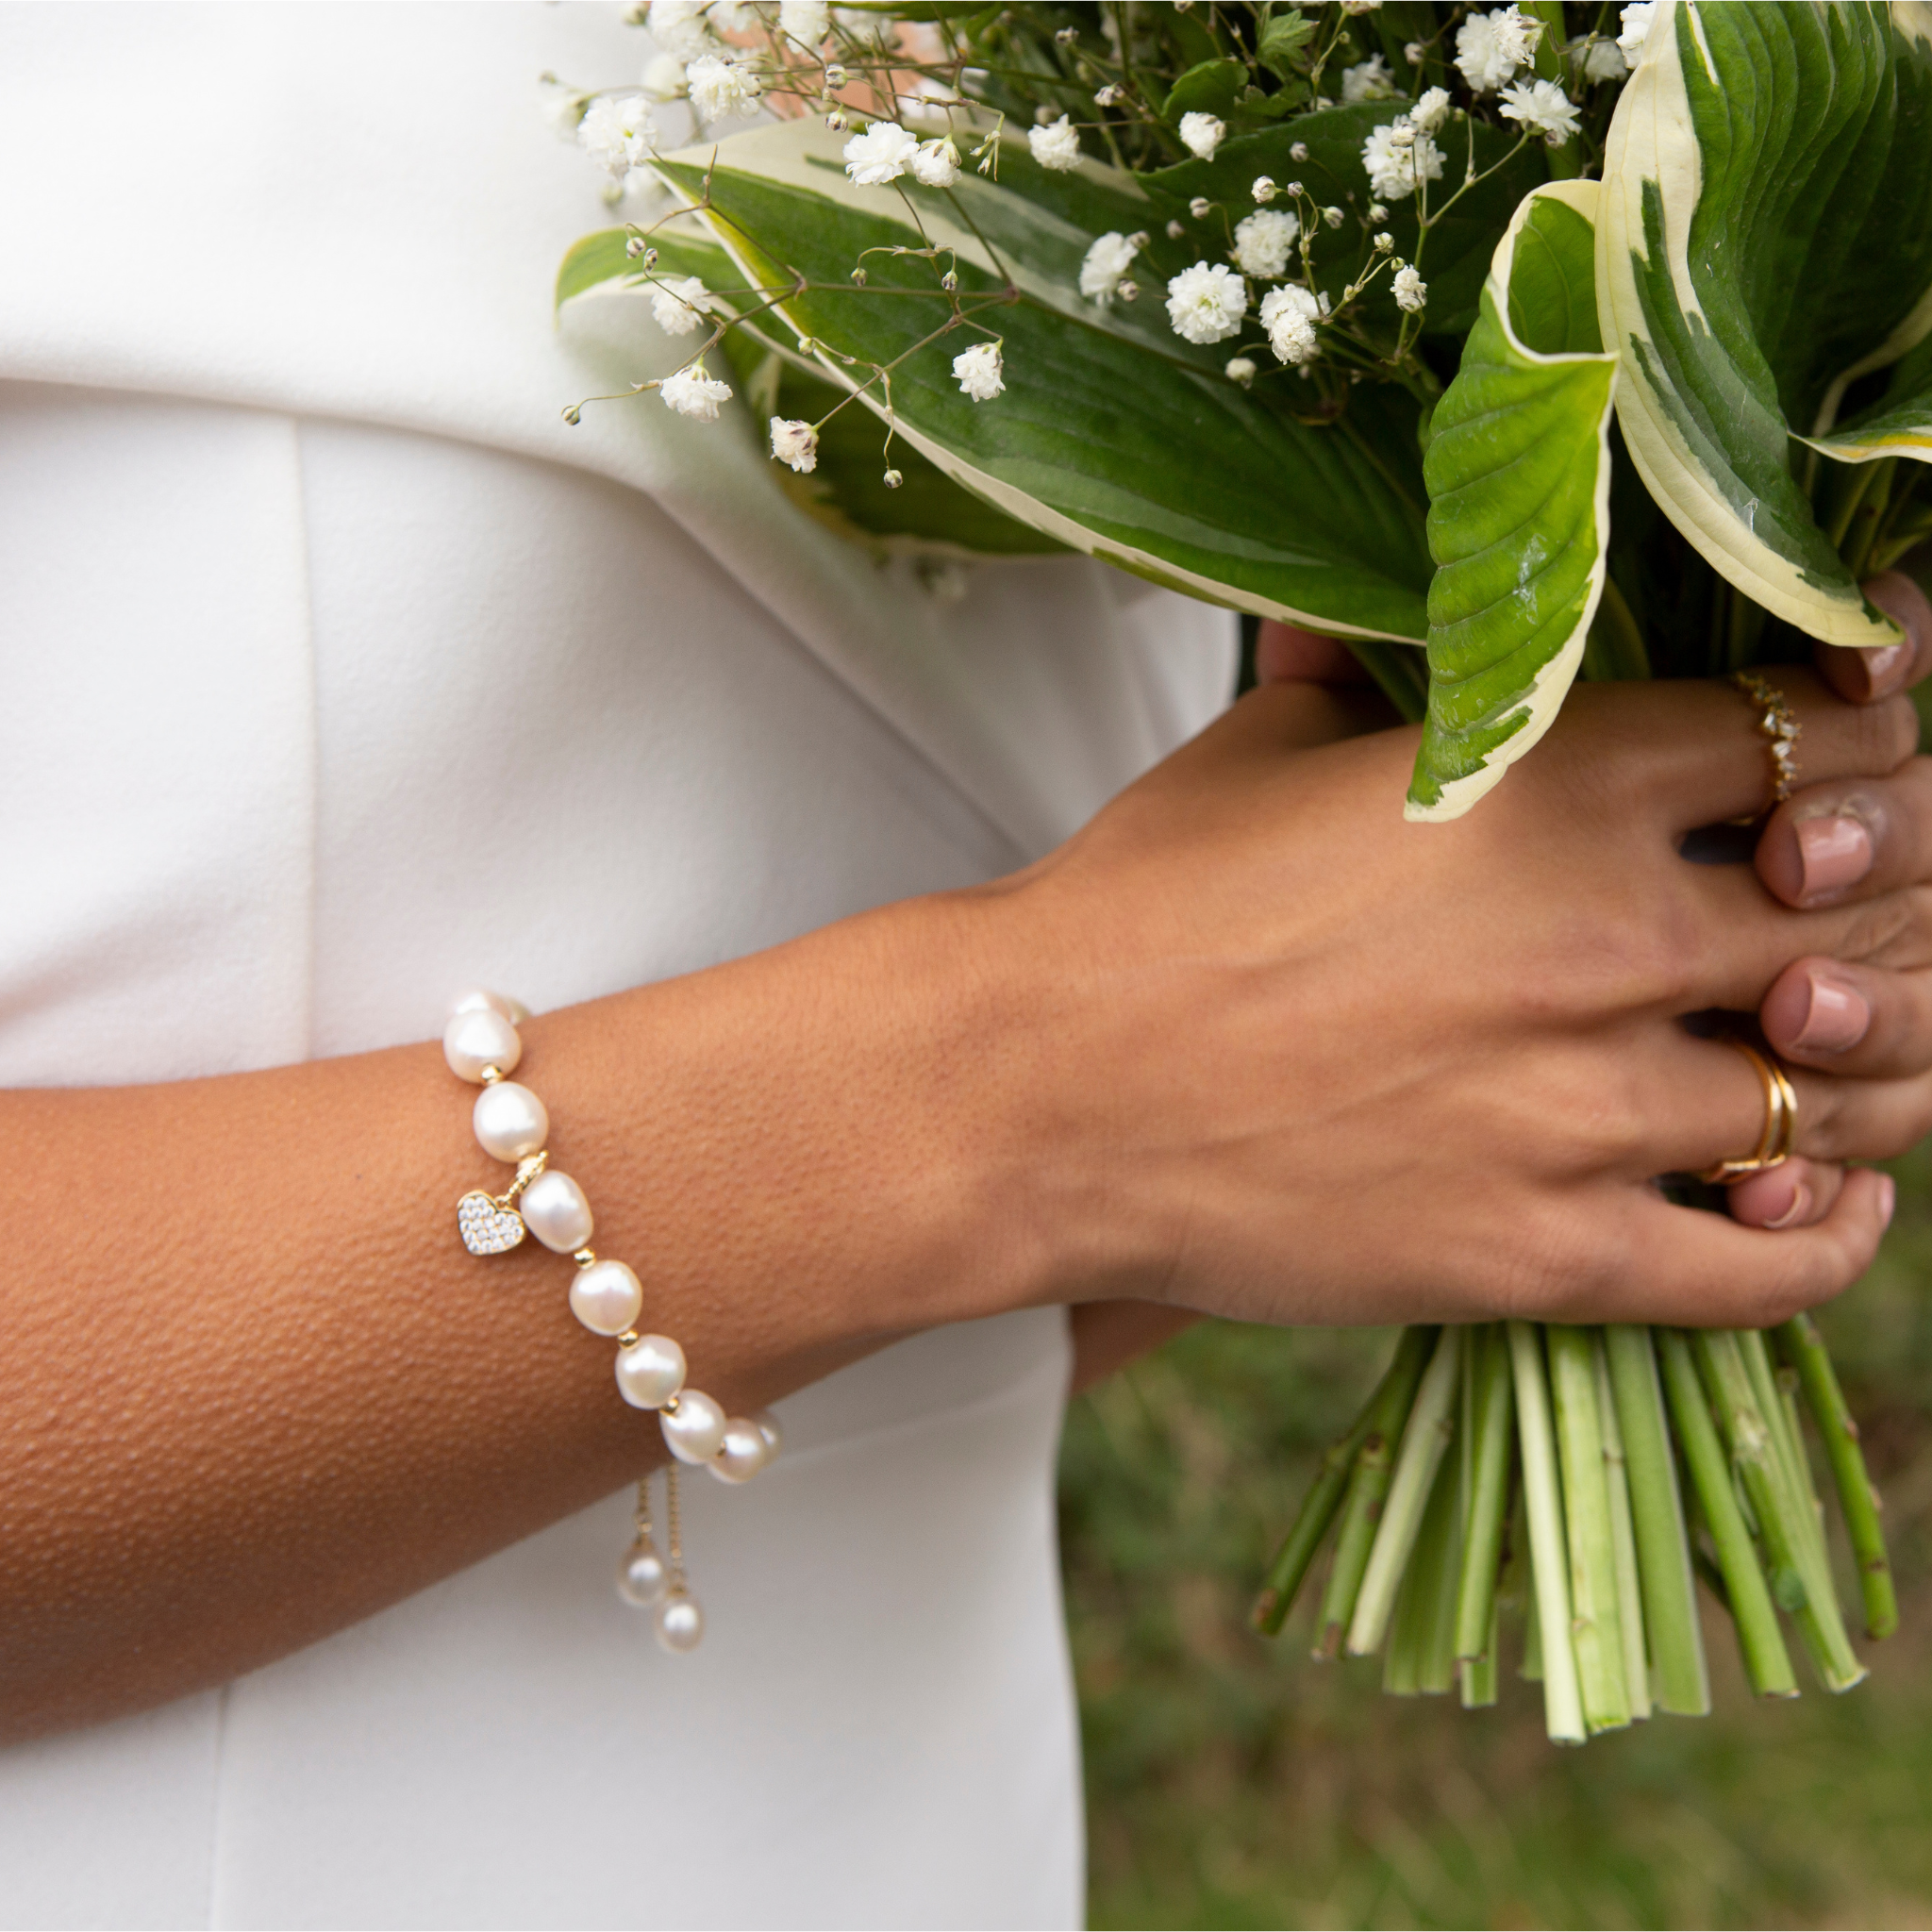 Make Your Wedding Day Shine with Pearls: Jewelry Tips for Everyone